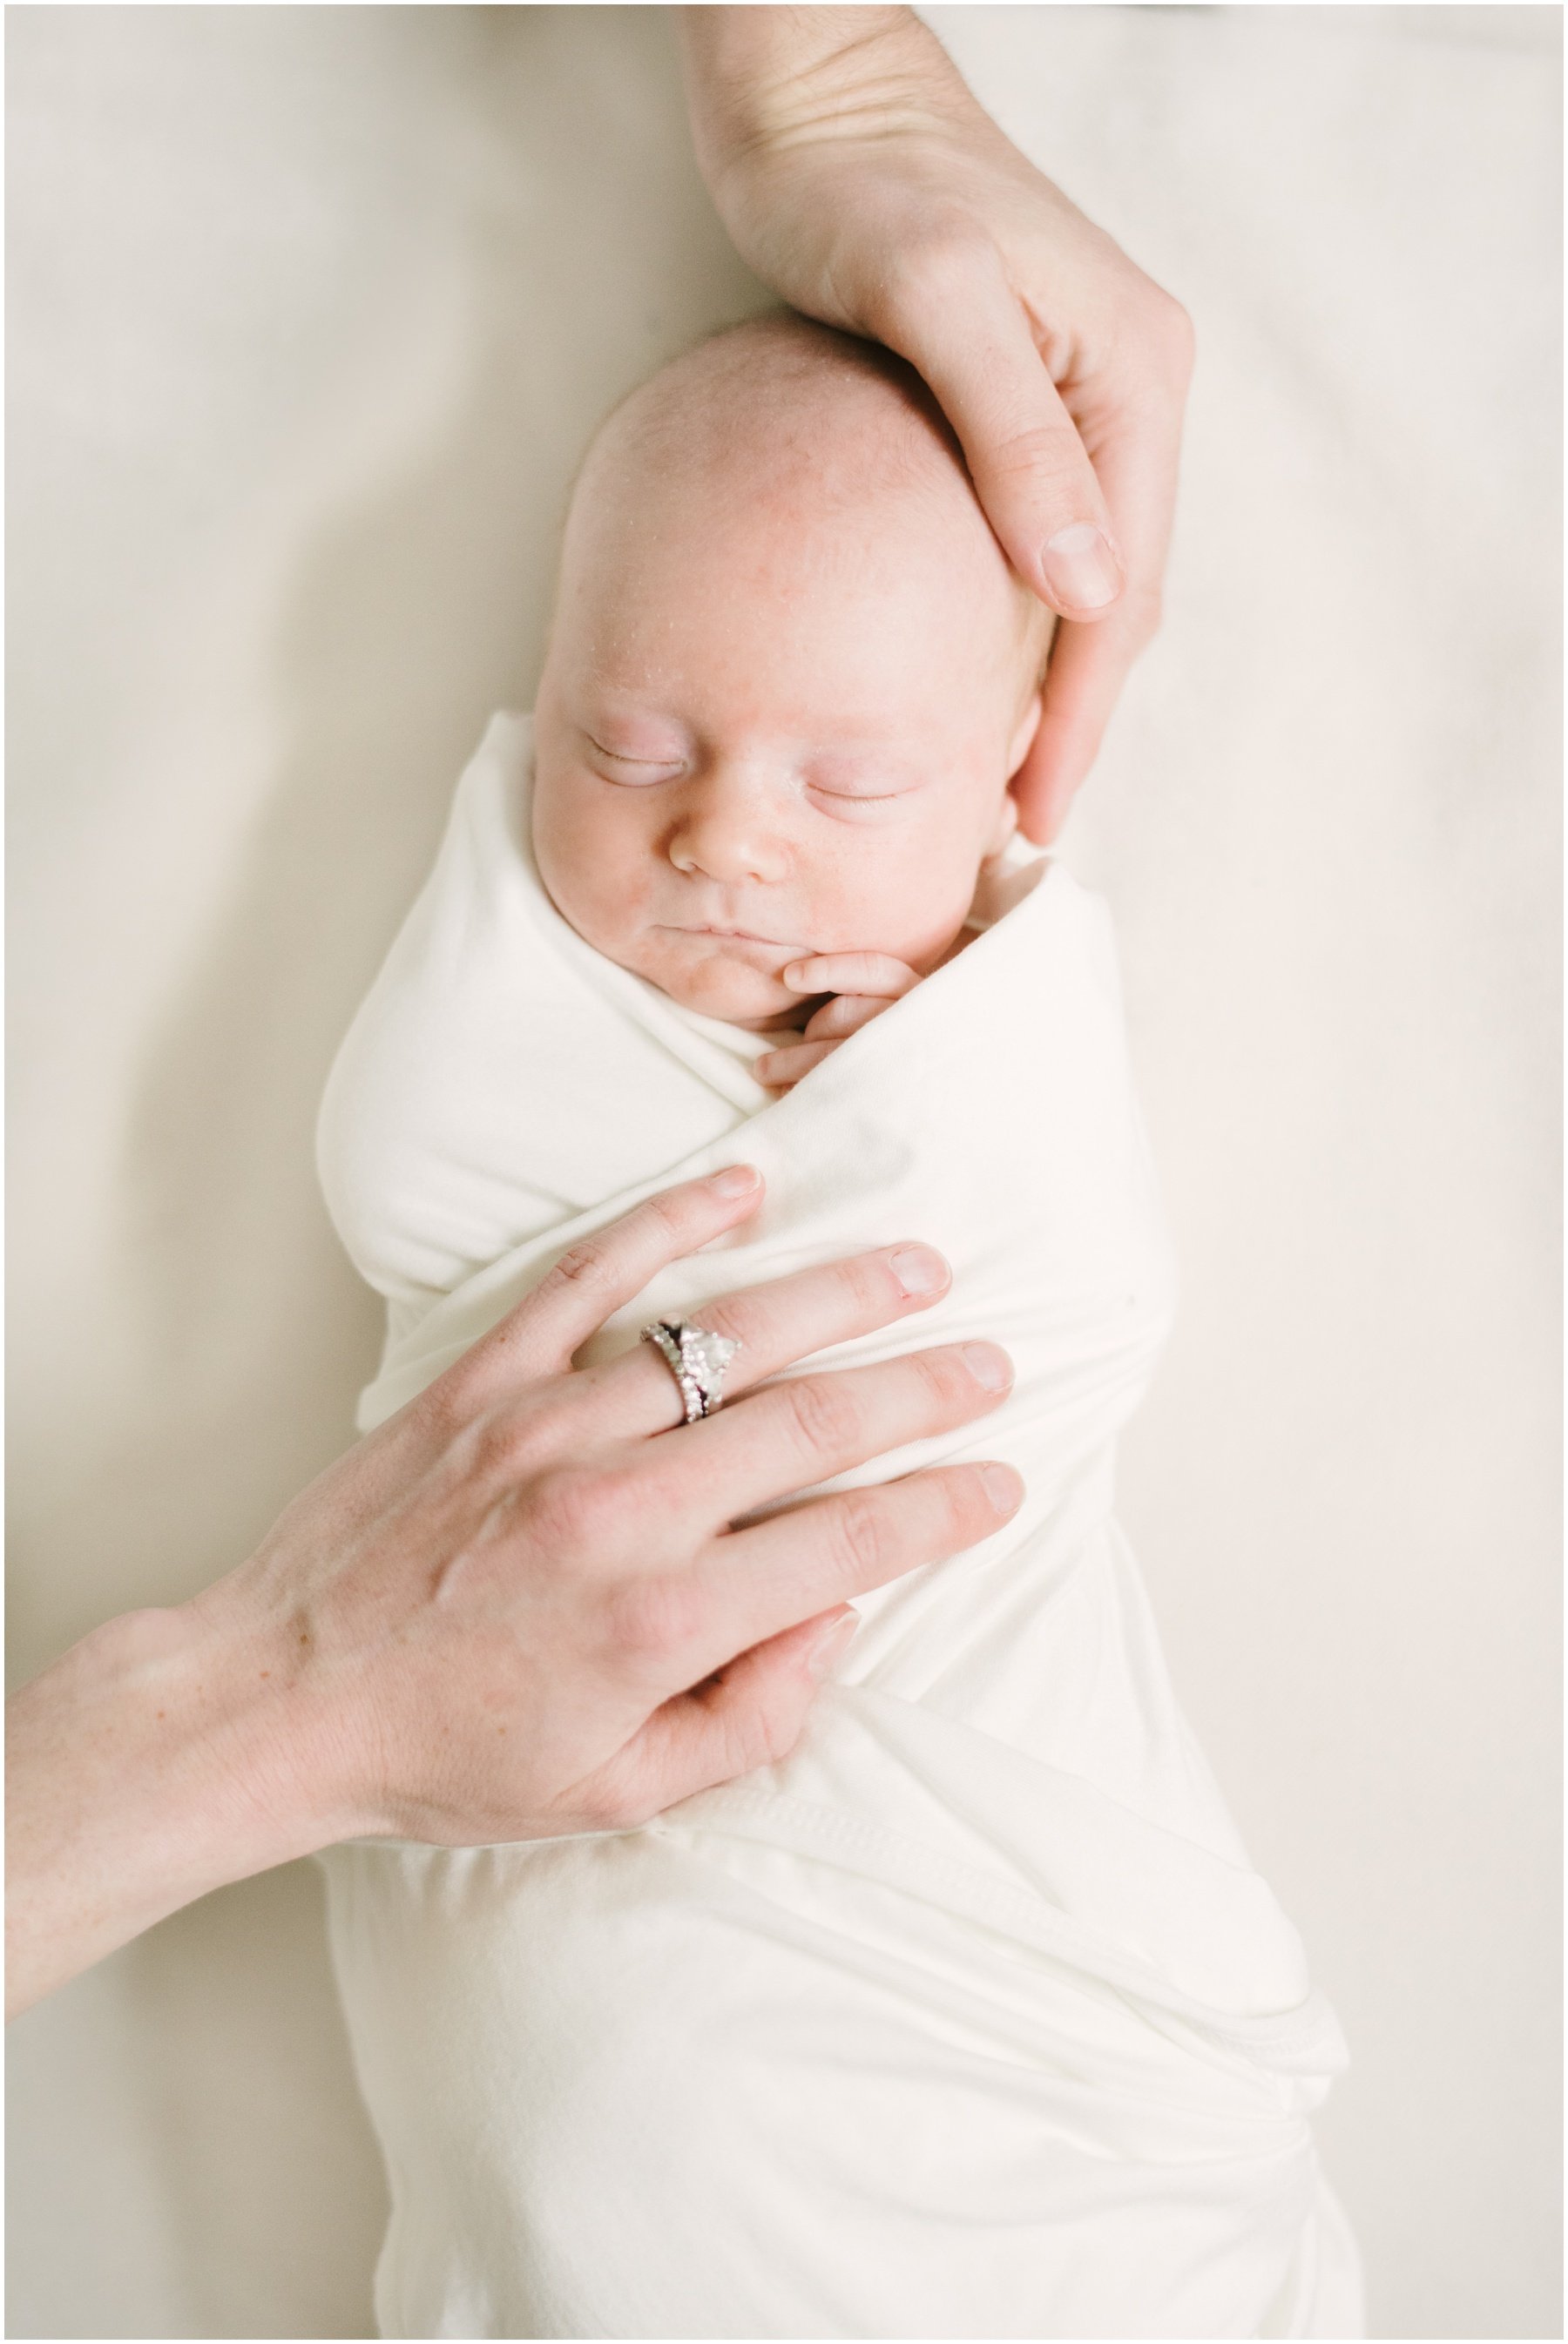 Baby wrapped in swaddle during newborn session | NKB Photo